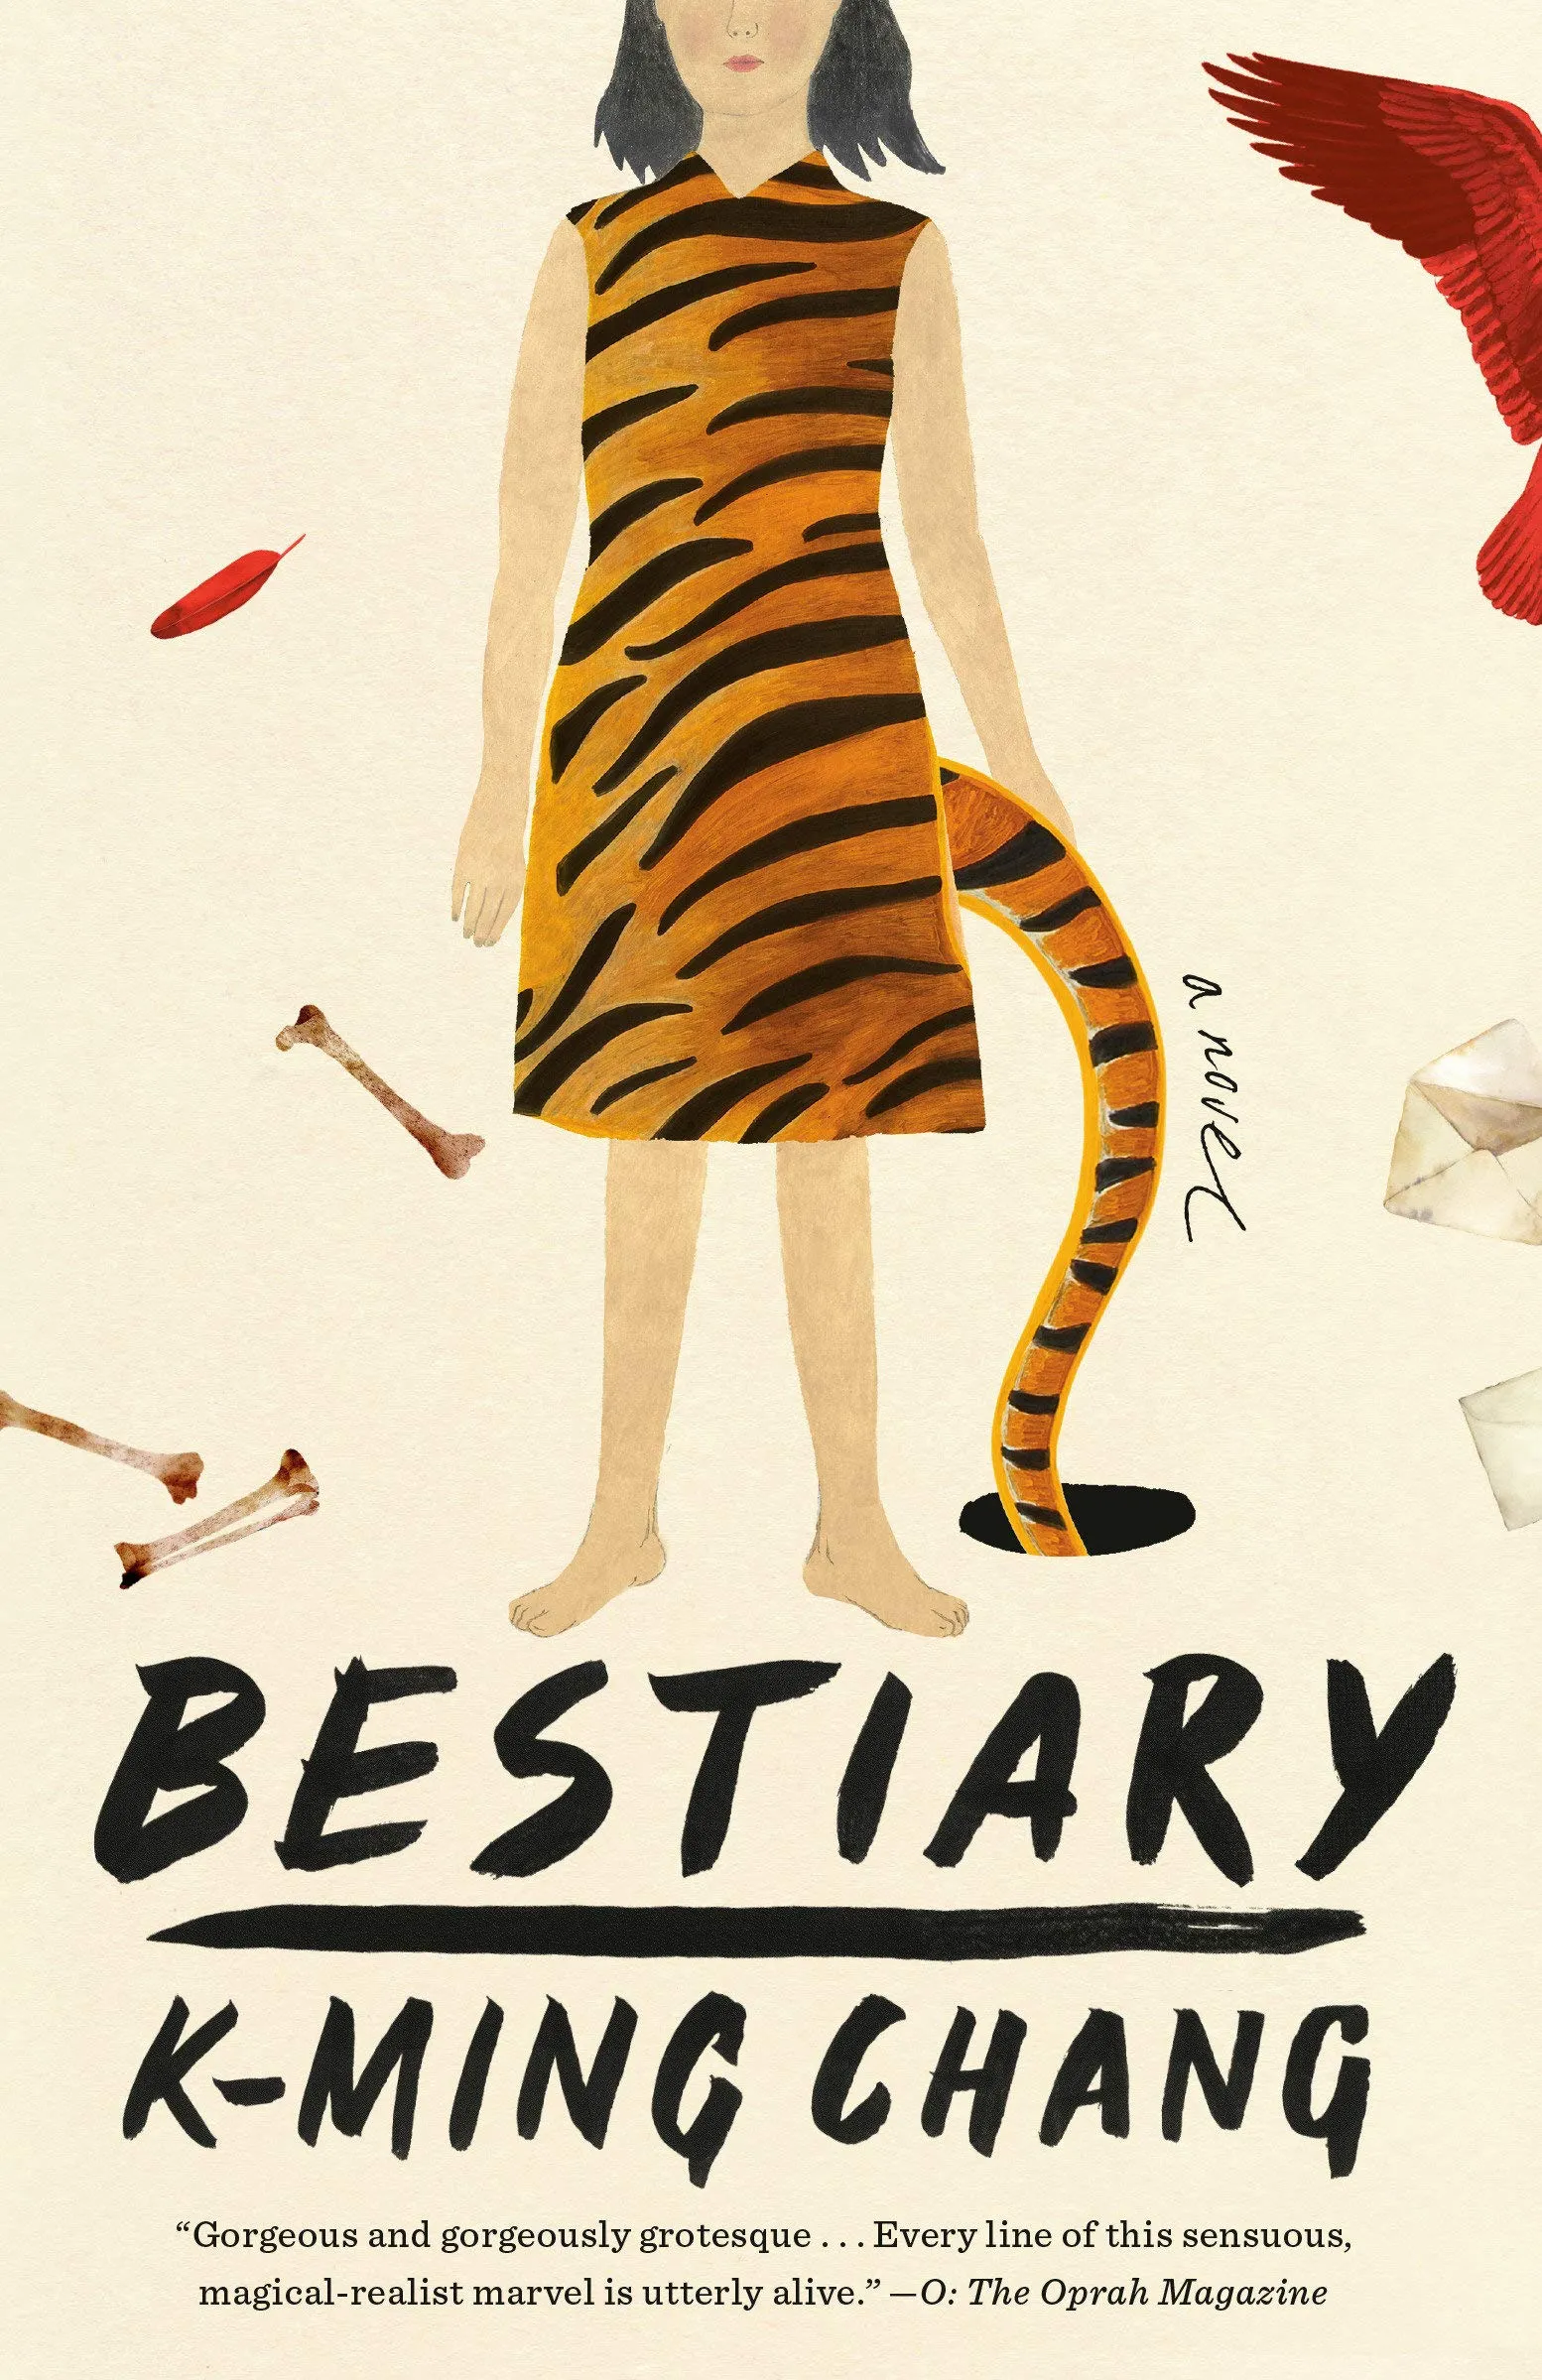 A graphic of the cover of [AOC] Bestiary by K-Ming Chang